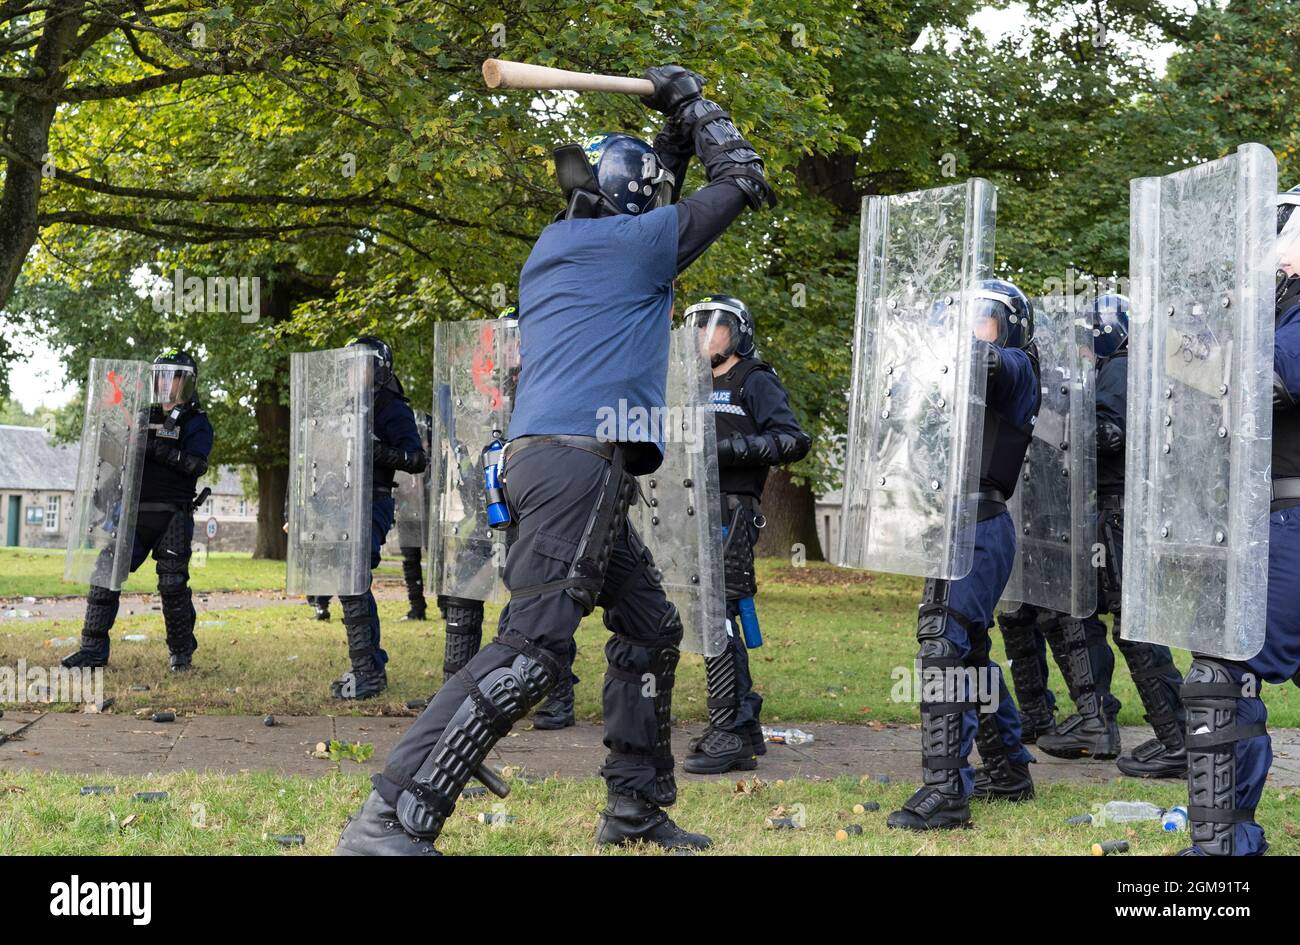 South Queensferry,, Scotland, UK. 16th September 2021. Police Scotland invite the press to witness their ongoing public order training at Craigiehall Stock Photo